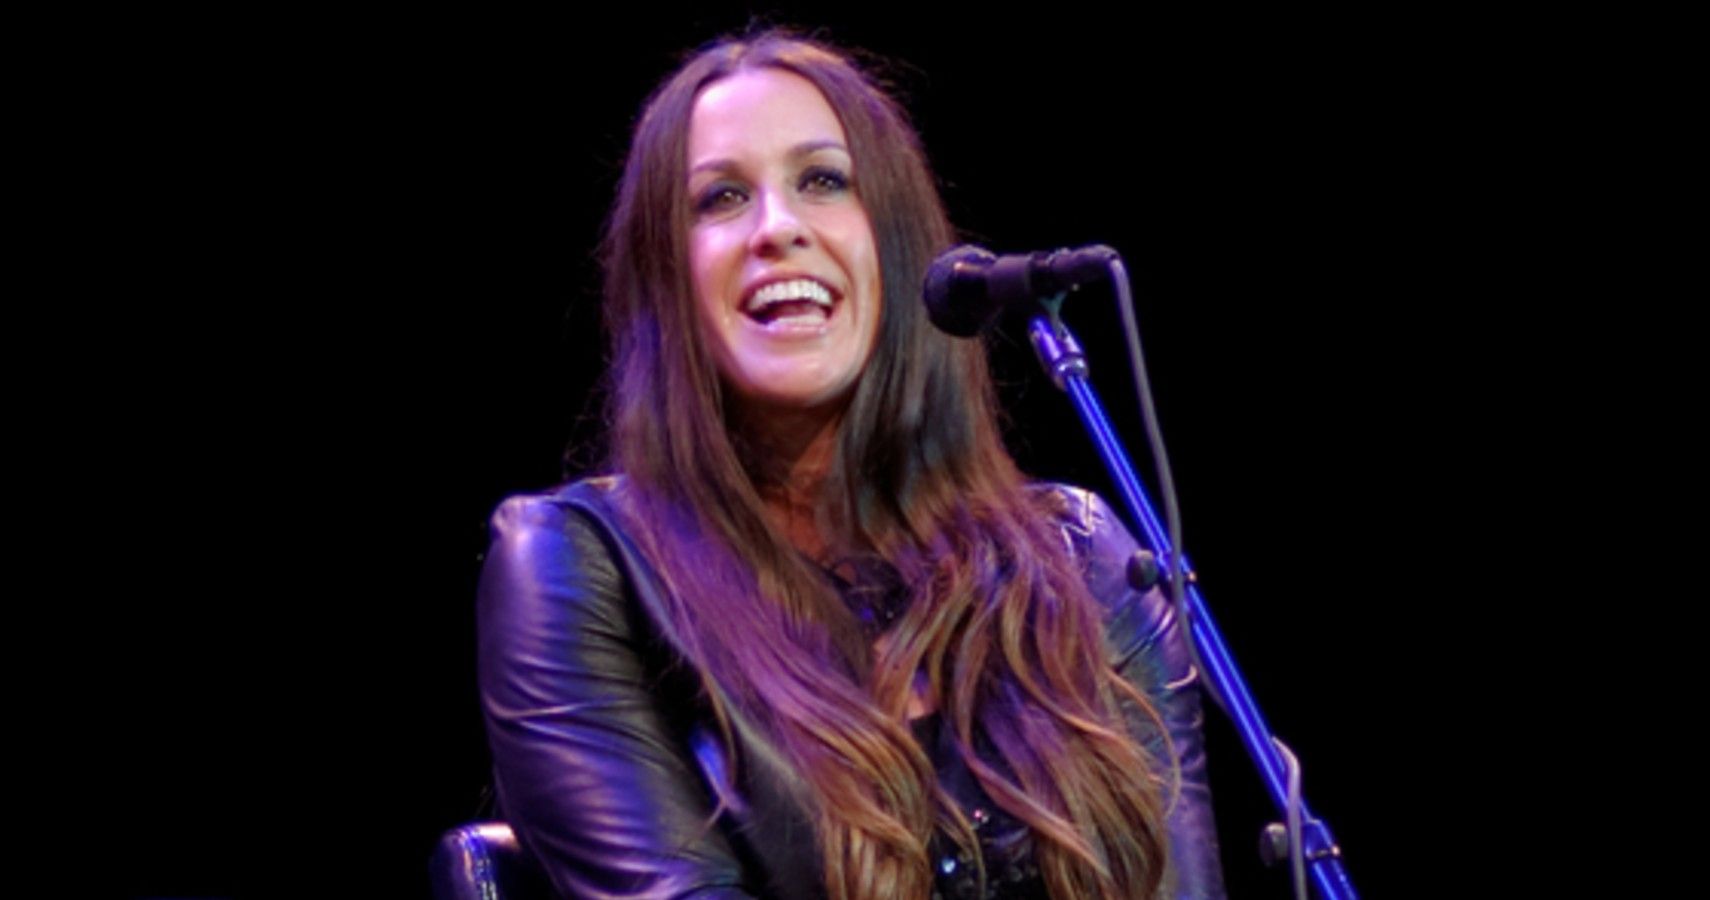 Alanis Morissette Reveals She Suffered From Postpartum Depression For 2 Years: “I’m Finally On The Other Side Of It”